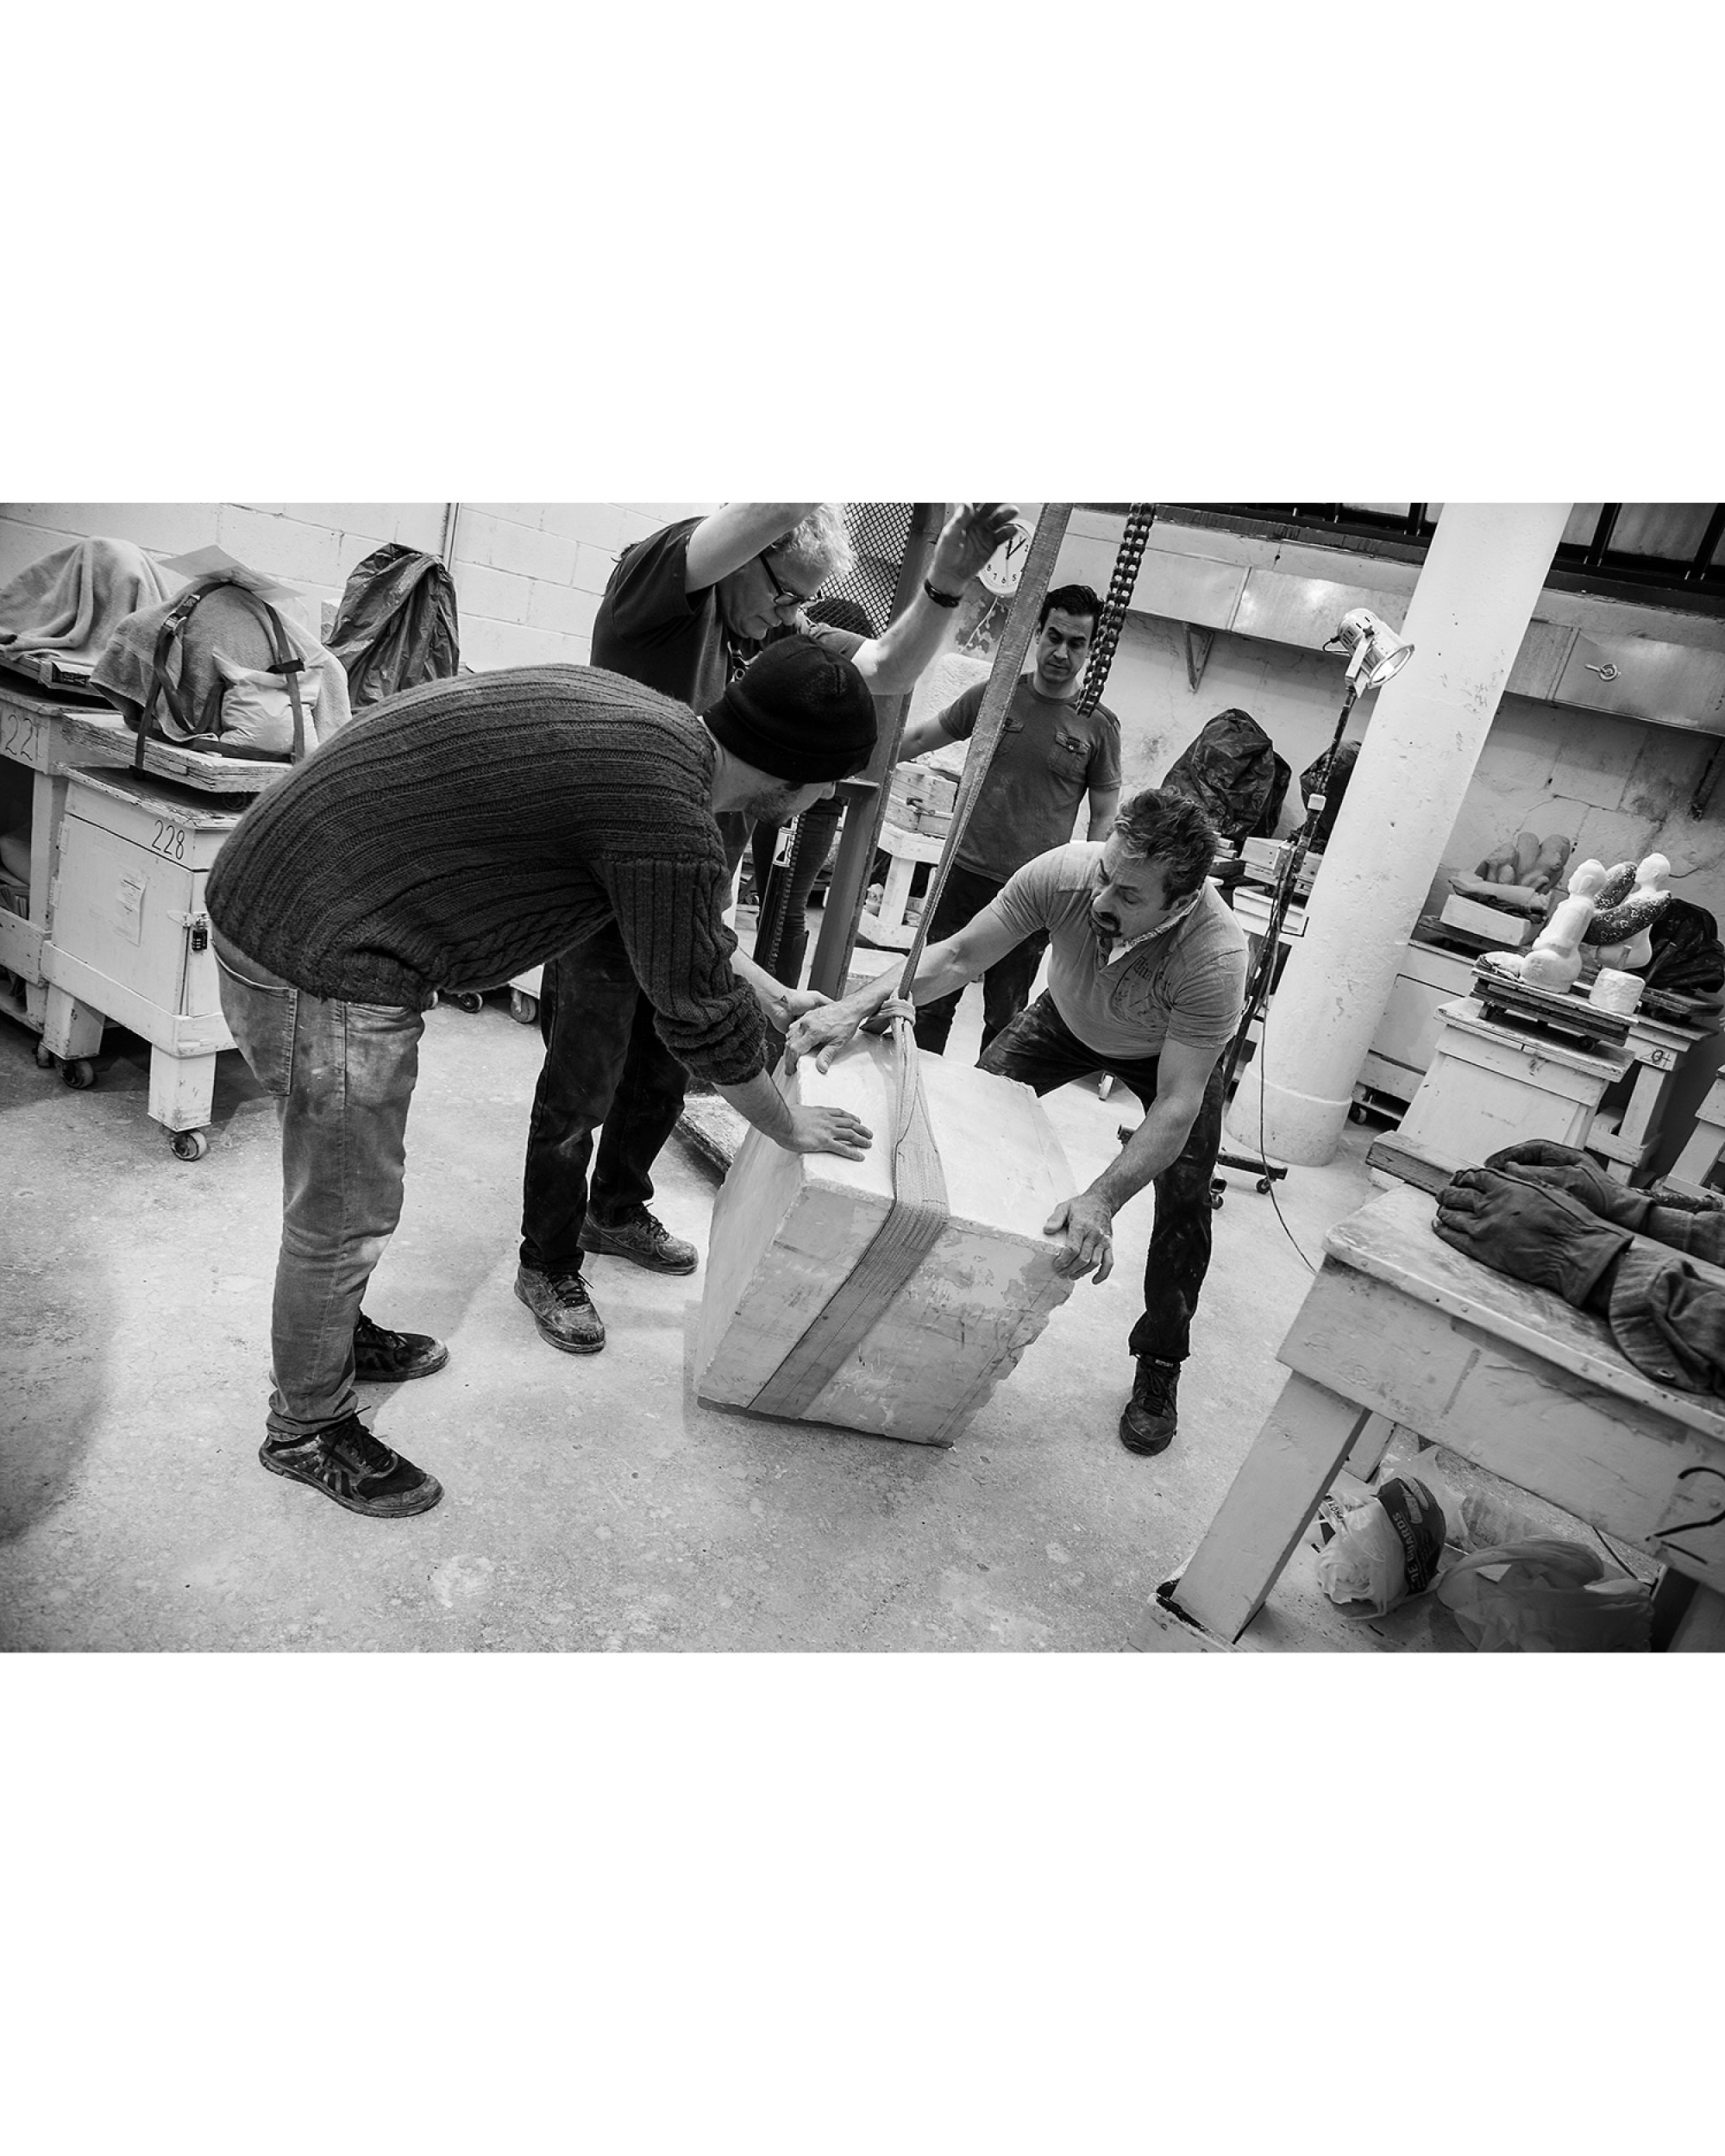 Receiving a raw block of marble in the studio. Photo by Sarah Macel.